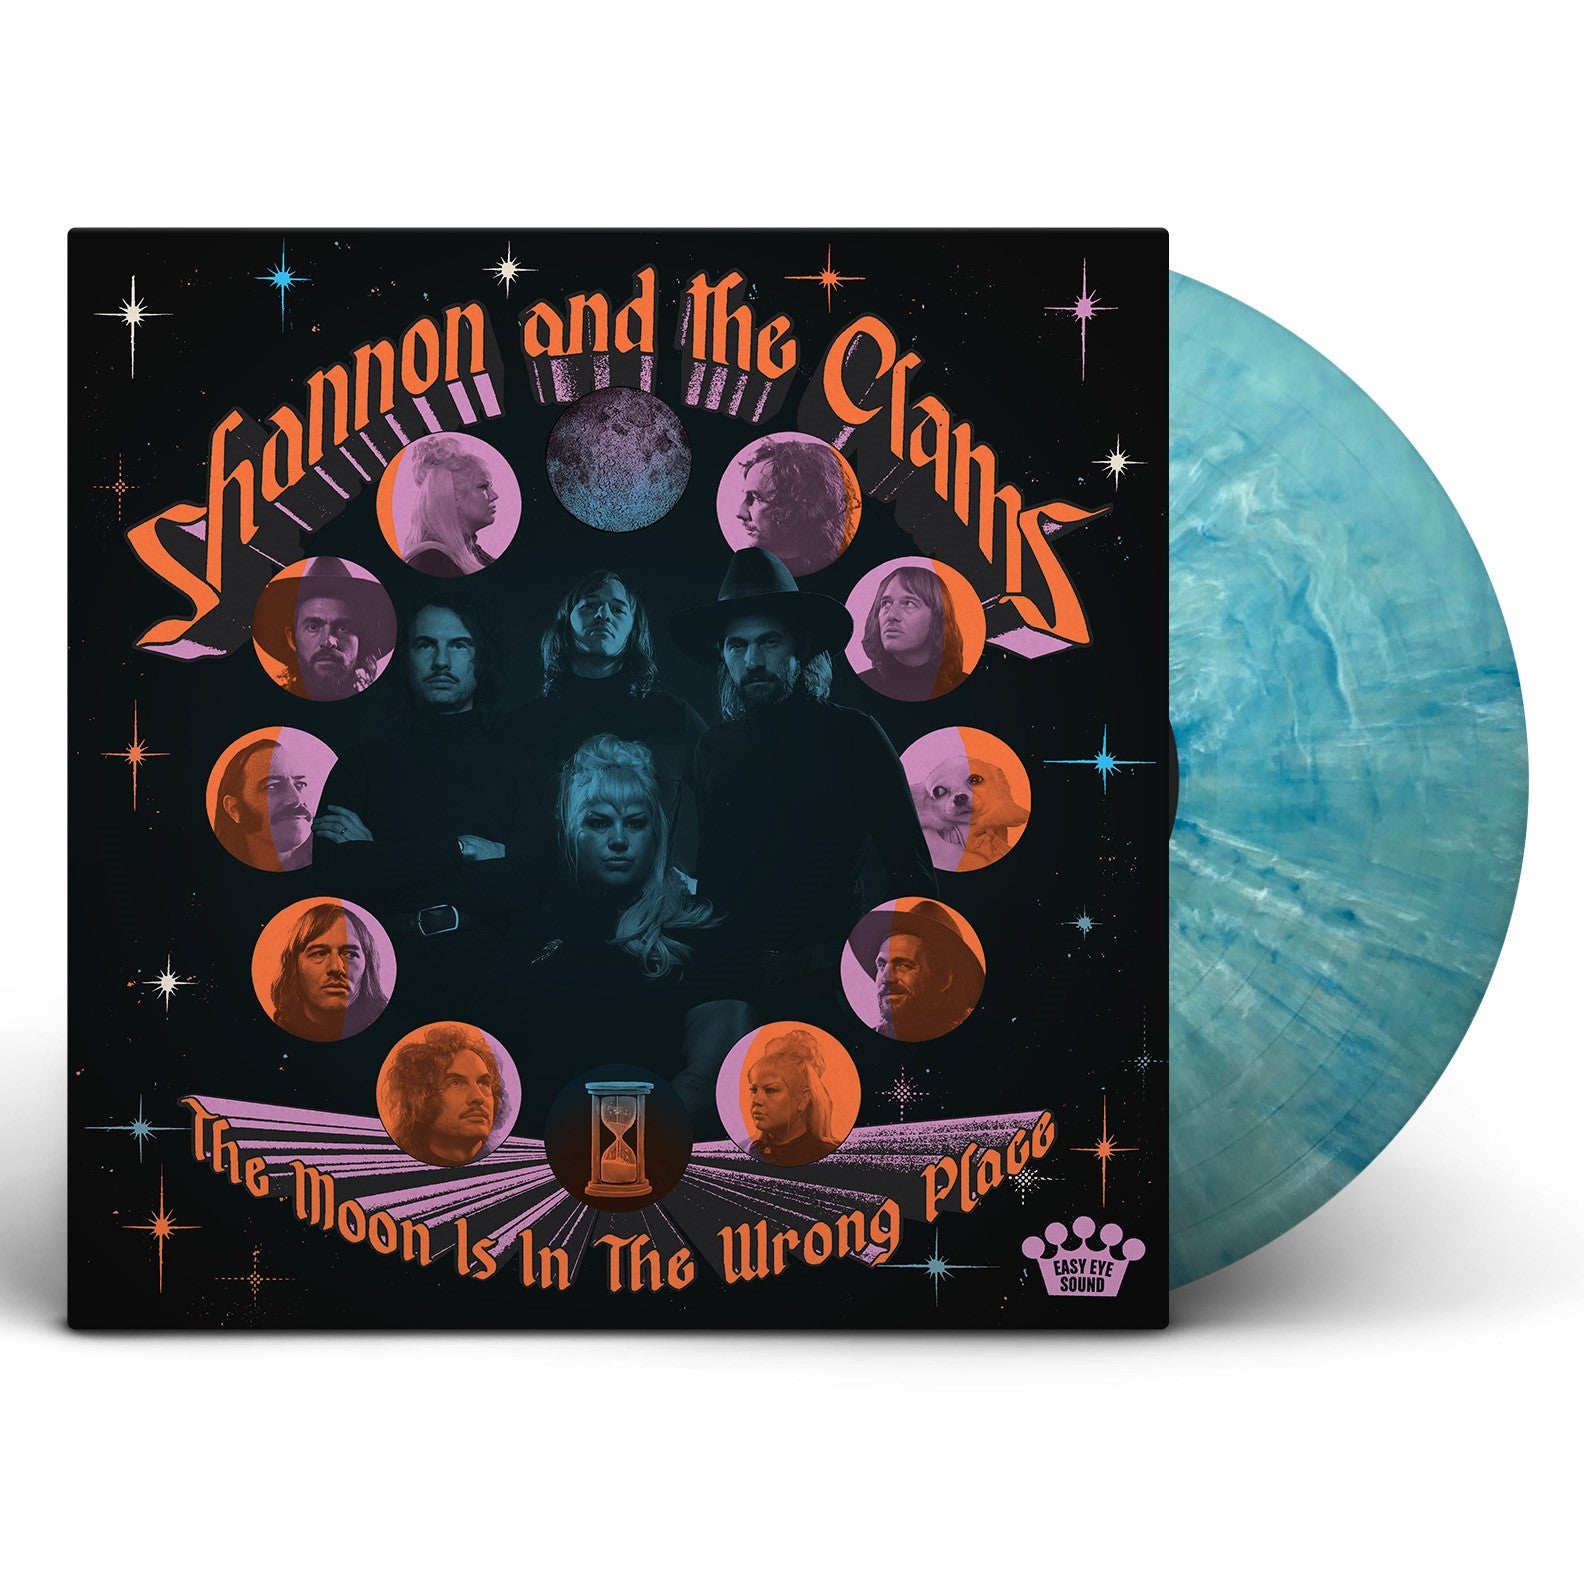 Shannon & The Clams - The Moon Is In The Wrong Place: Limited Blue Splatter Vinyl LP